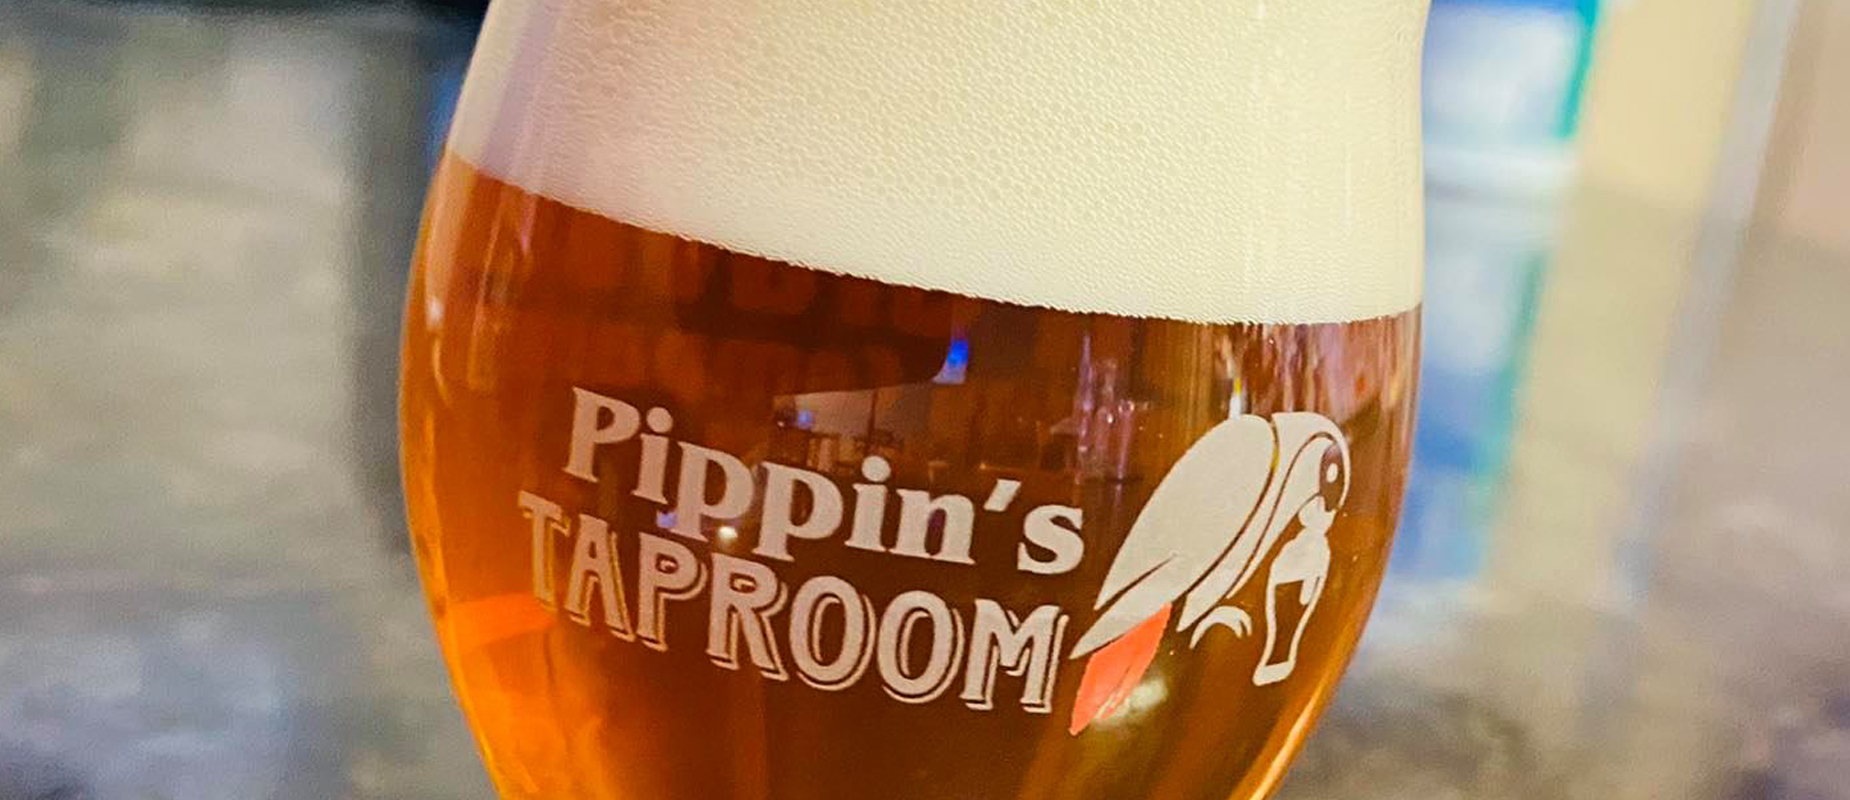 Pippin's Taproom at High Gravity